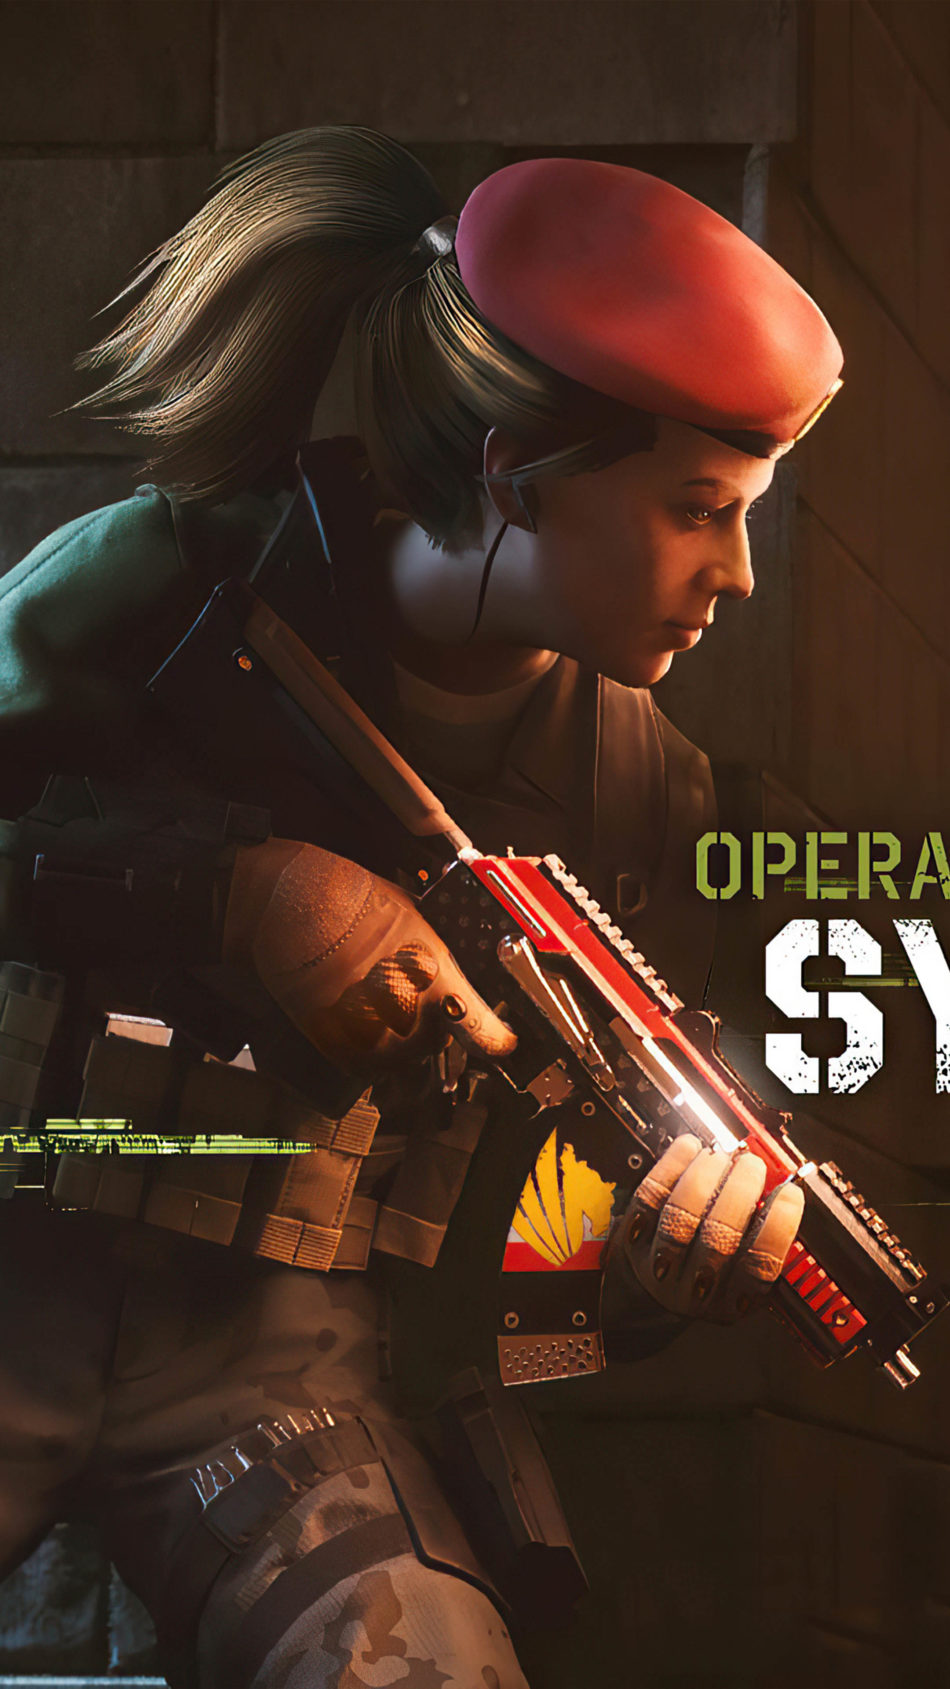 Firewall Zero Hour Operation Syndicate Wallpapers